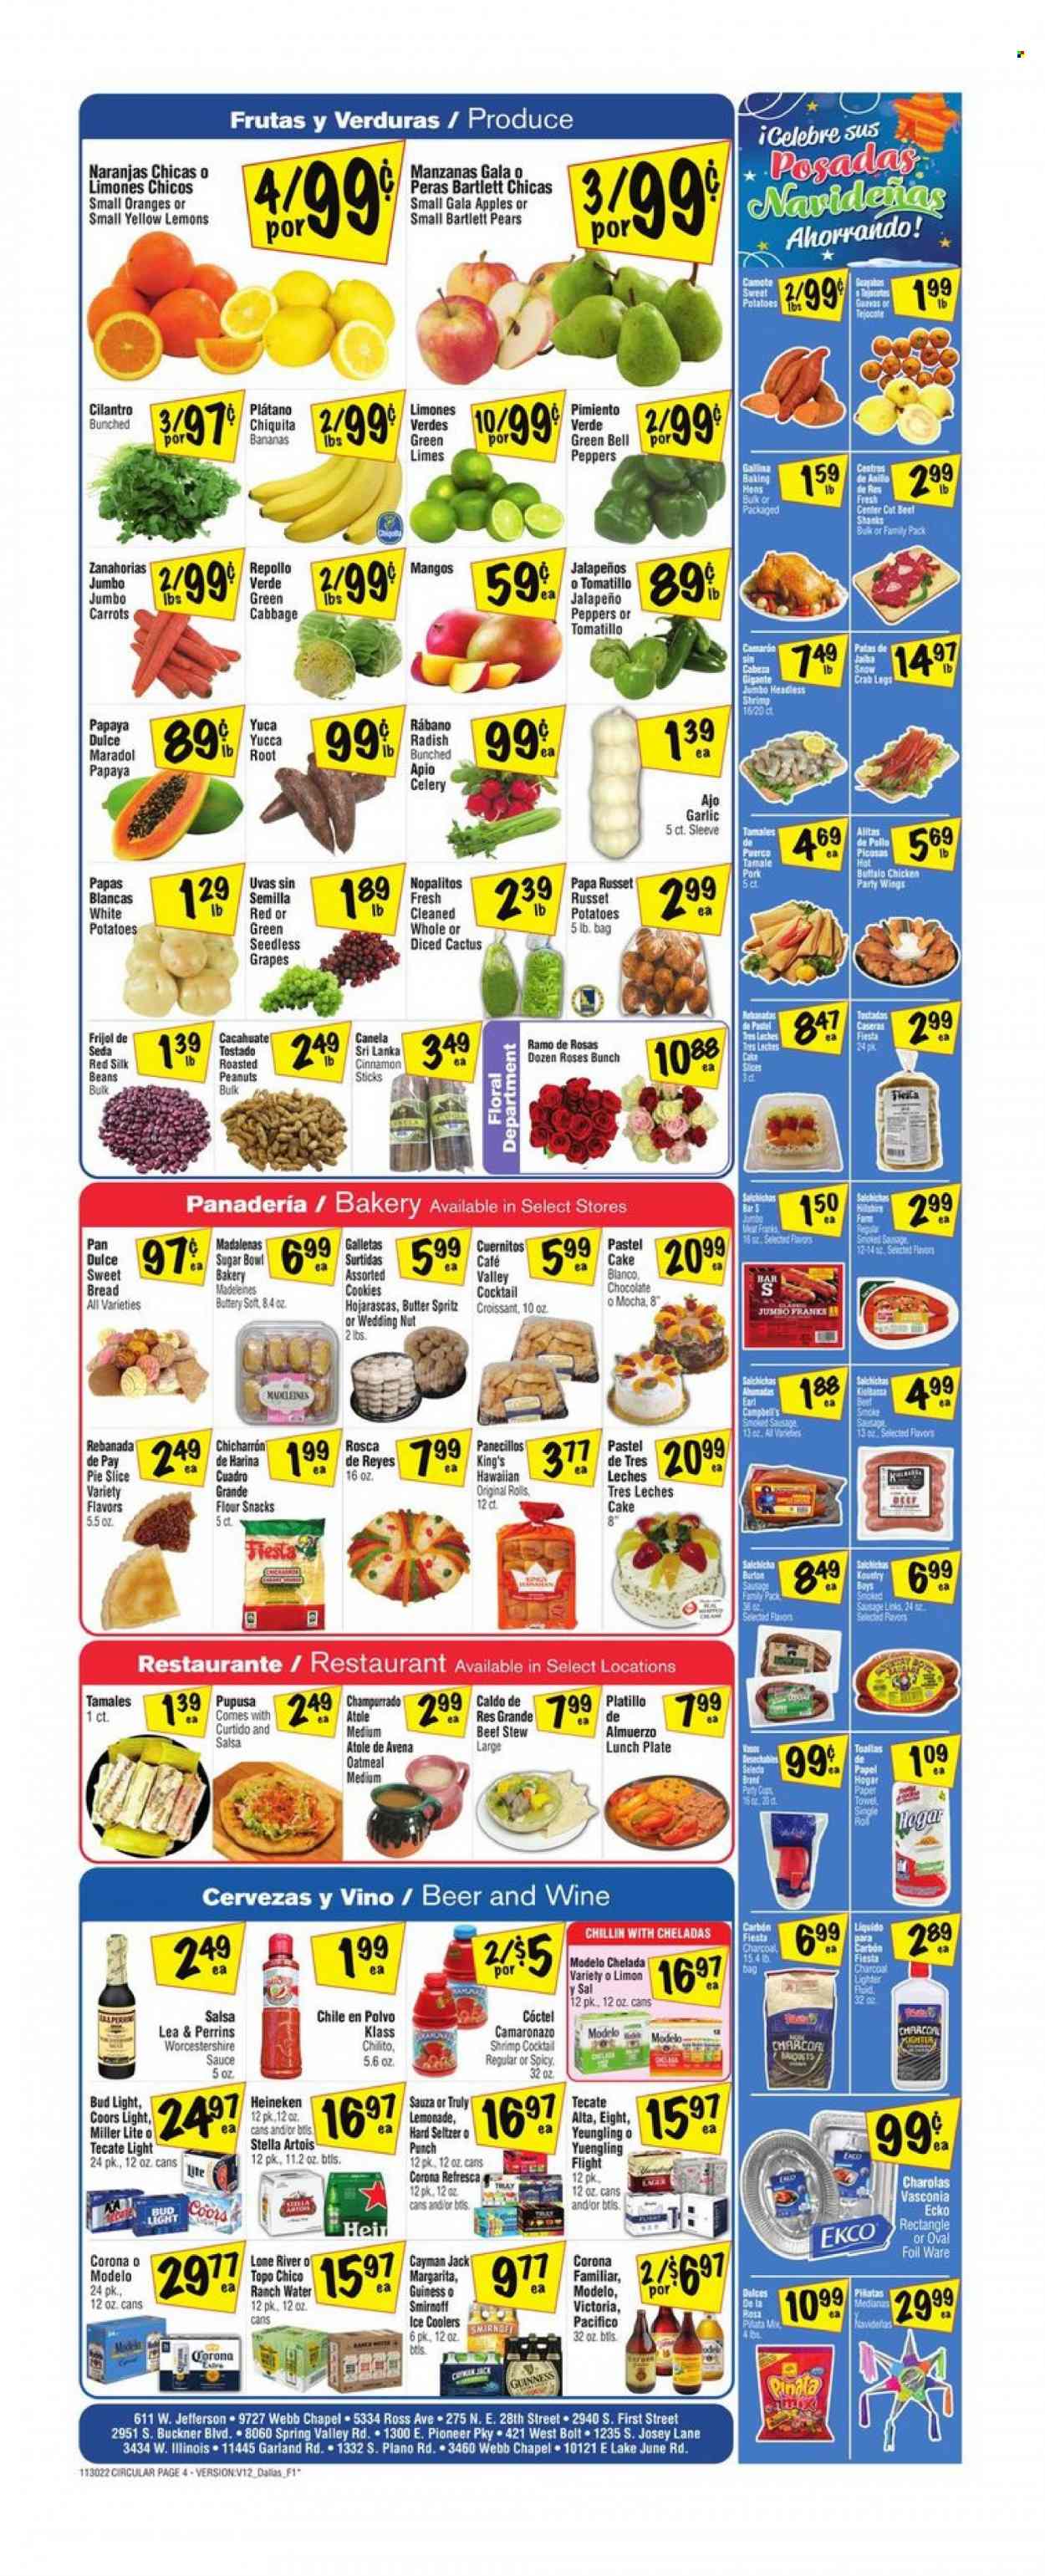 thumbnail - Fiesta Mart Flyer - 11/30/2022 - 12/06/2022 - Sales products - pie, croissant, hawaiian rolls, sweet bread, beans, bell peppers, cabbage, carrots, celery, radishes, russet potatoes, sweet potato, tomatillo, potatoes, snack, jalapeño, sleeved celery, bananas, Bartlett pears, Gala, grapes, limes, mango, seedless grapes, papaya, crab legs, crab, shrimps, Campbell's, sauce, ready meal, sausage, smoked sausage, frankfurters, Silk, butter, chicken wings, cookies, bars, flour, oatmeal, cinnamon sticks, cilantro, cinnamon, worcestershire sauce, salsa, roasted peanuts, peanuts, lemonade, water, wine, Smirnoff, punch, Hard Seltzer, TRULY, beer, Stella Artois, Bud Light, Corona Extra, Heineken, Guinness, Modelo, Topo Chico, chicken, bowl, cup, Miller Lite, Coors, Yuengling. Page 4.